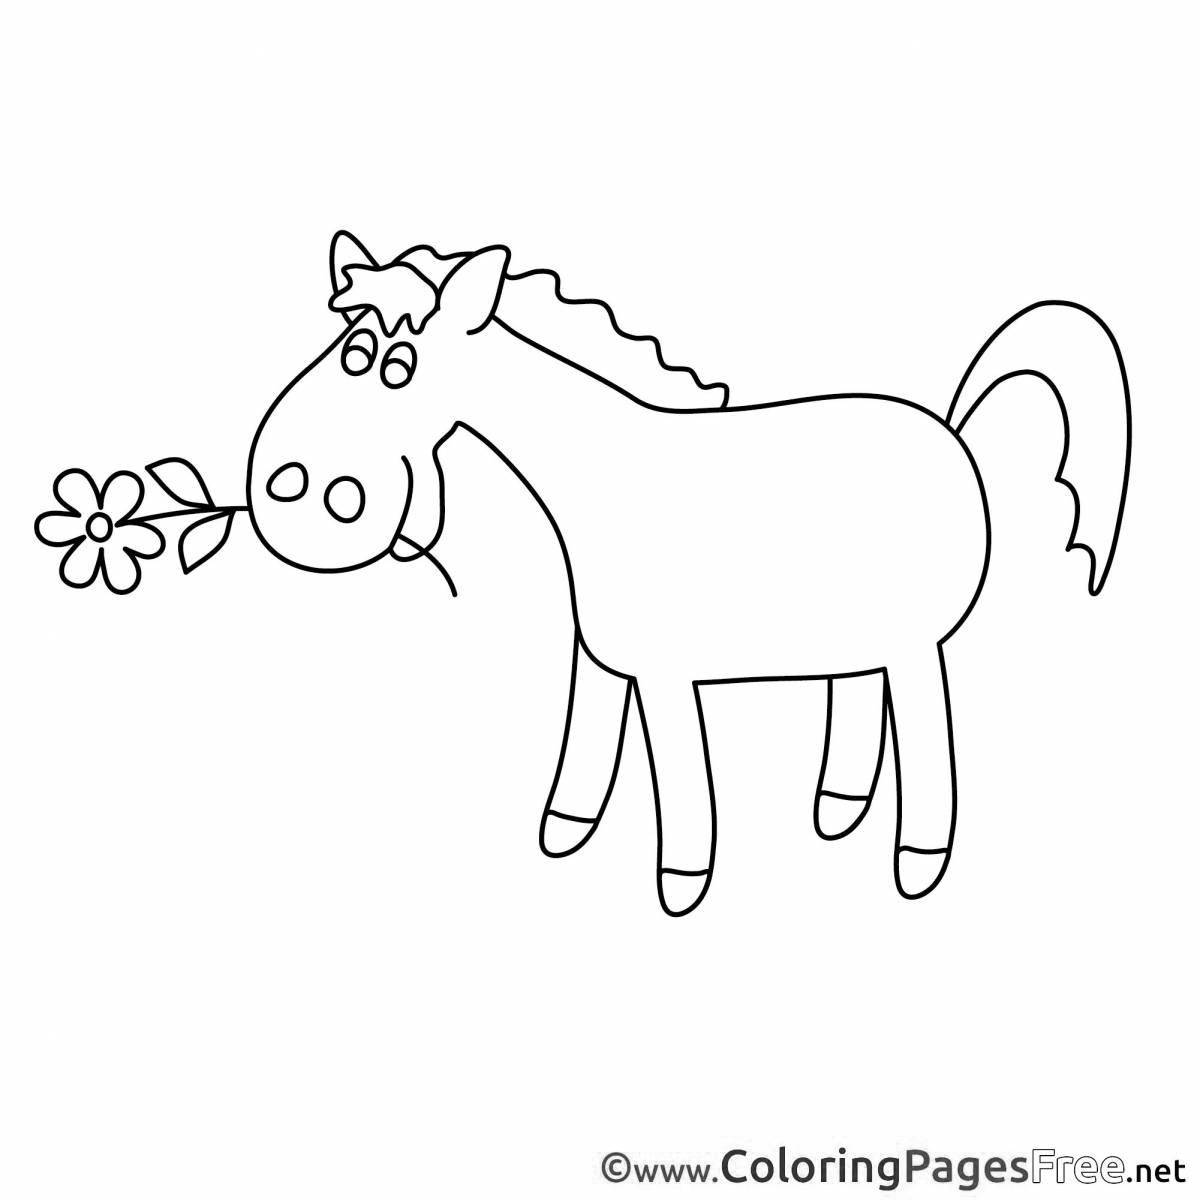 Luxury blue tractor coloring page